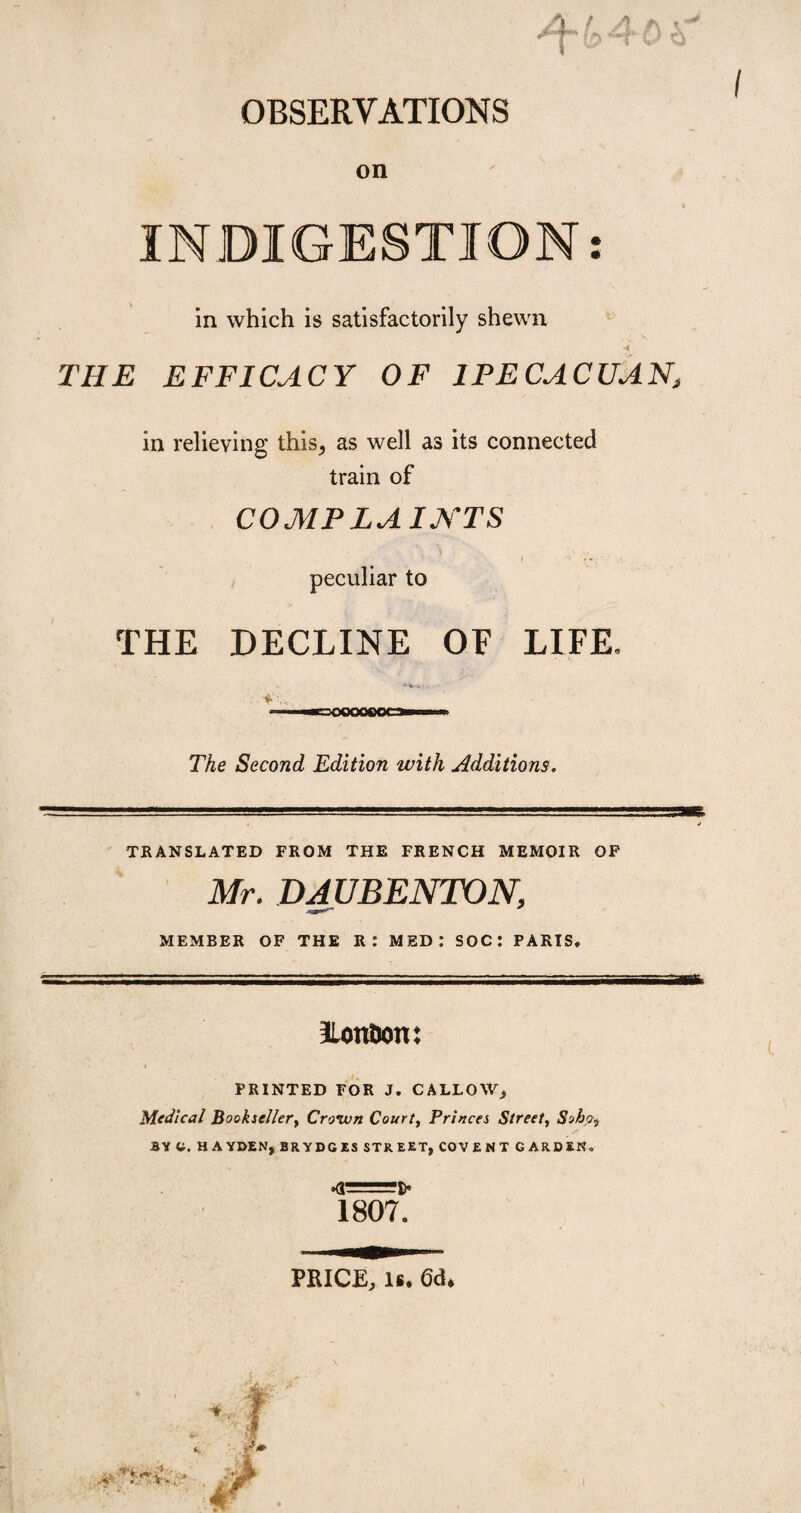 * * OBSERVATIONS on INDIGESTION: in which is satisfactorily shewn •i THE EFFICACY OF 1PECACUAN, in relieving this, as well as its connected train of COMPLAINTS K I '}*;'■ *• peculiar to THE DECLINE OF LIFE, The Second Edition with Additions. TRANSLATED FROM THE FRENCH MEMOIR OF Mr. DAUBENTON, MEMBER OF THE R: MED: SOC: PARIS. ILonùon: PRINTED FOR J. CALLOW, Medical Bookseller, Crown Court, Princes Street, Soho^ BY G. HAYDEN, BRYDGÏS STREET, COVENT GARDEN. •0=6* 1807. PRICE, is. 6d.